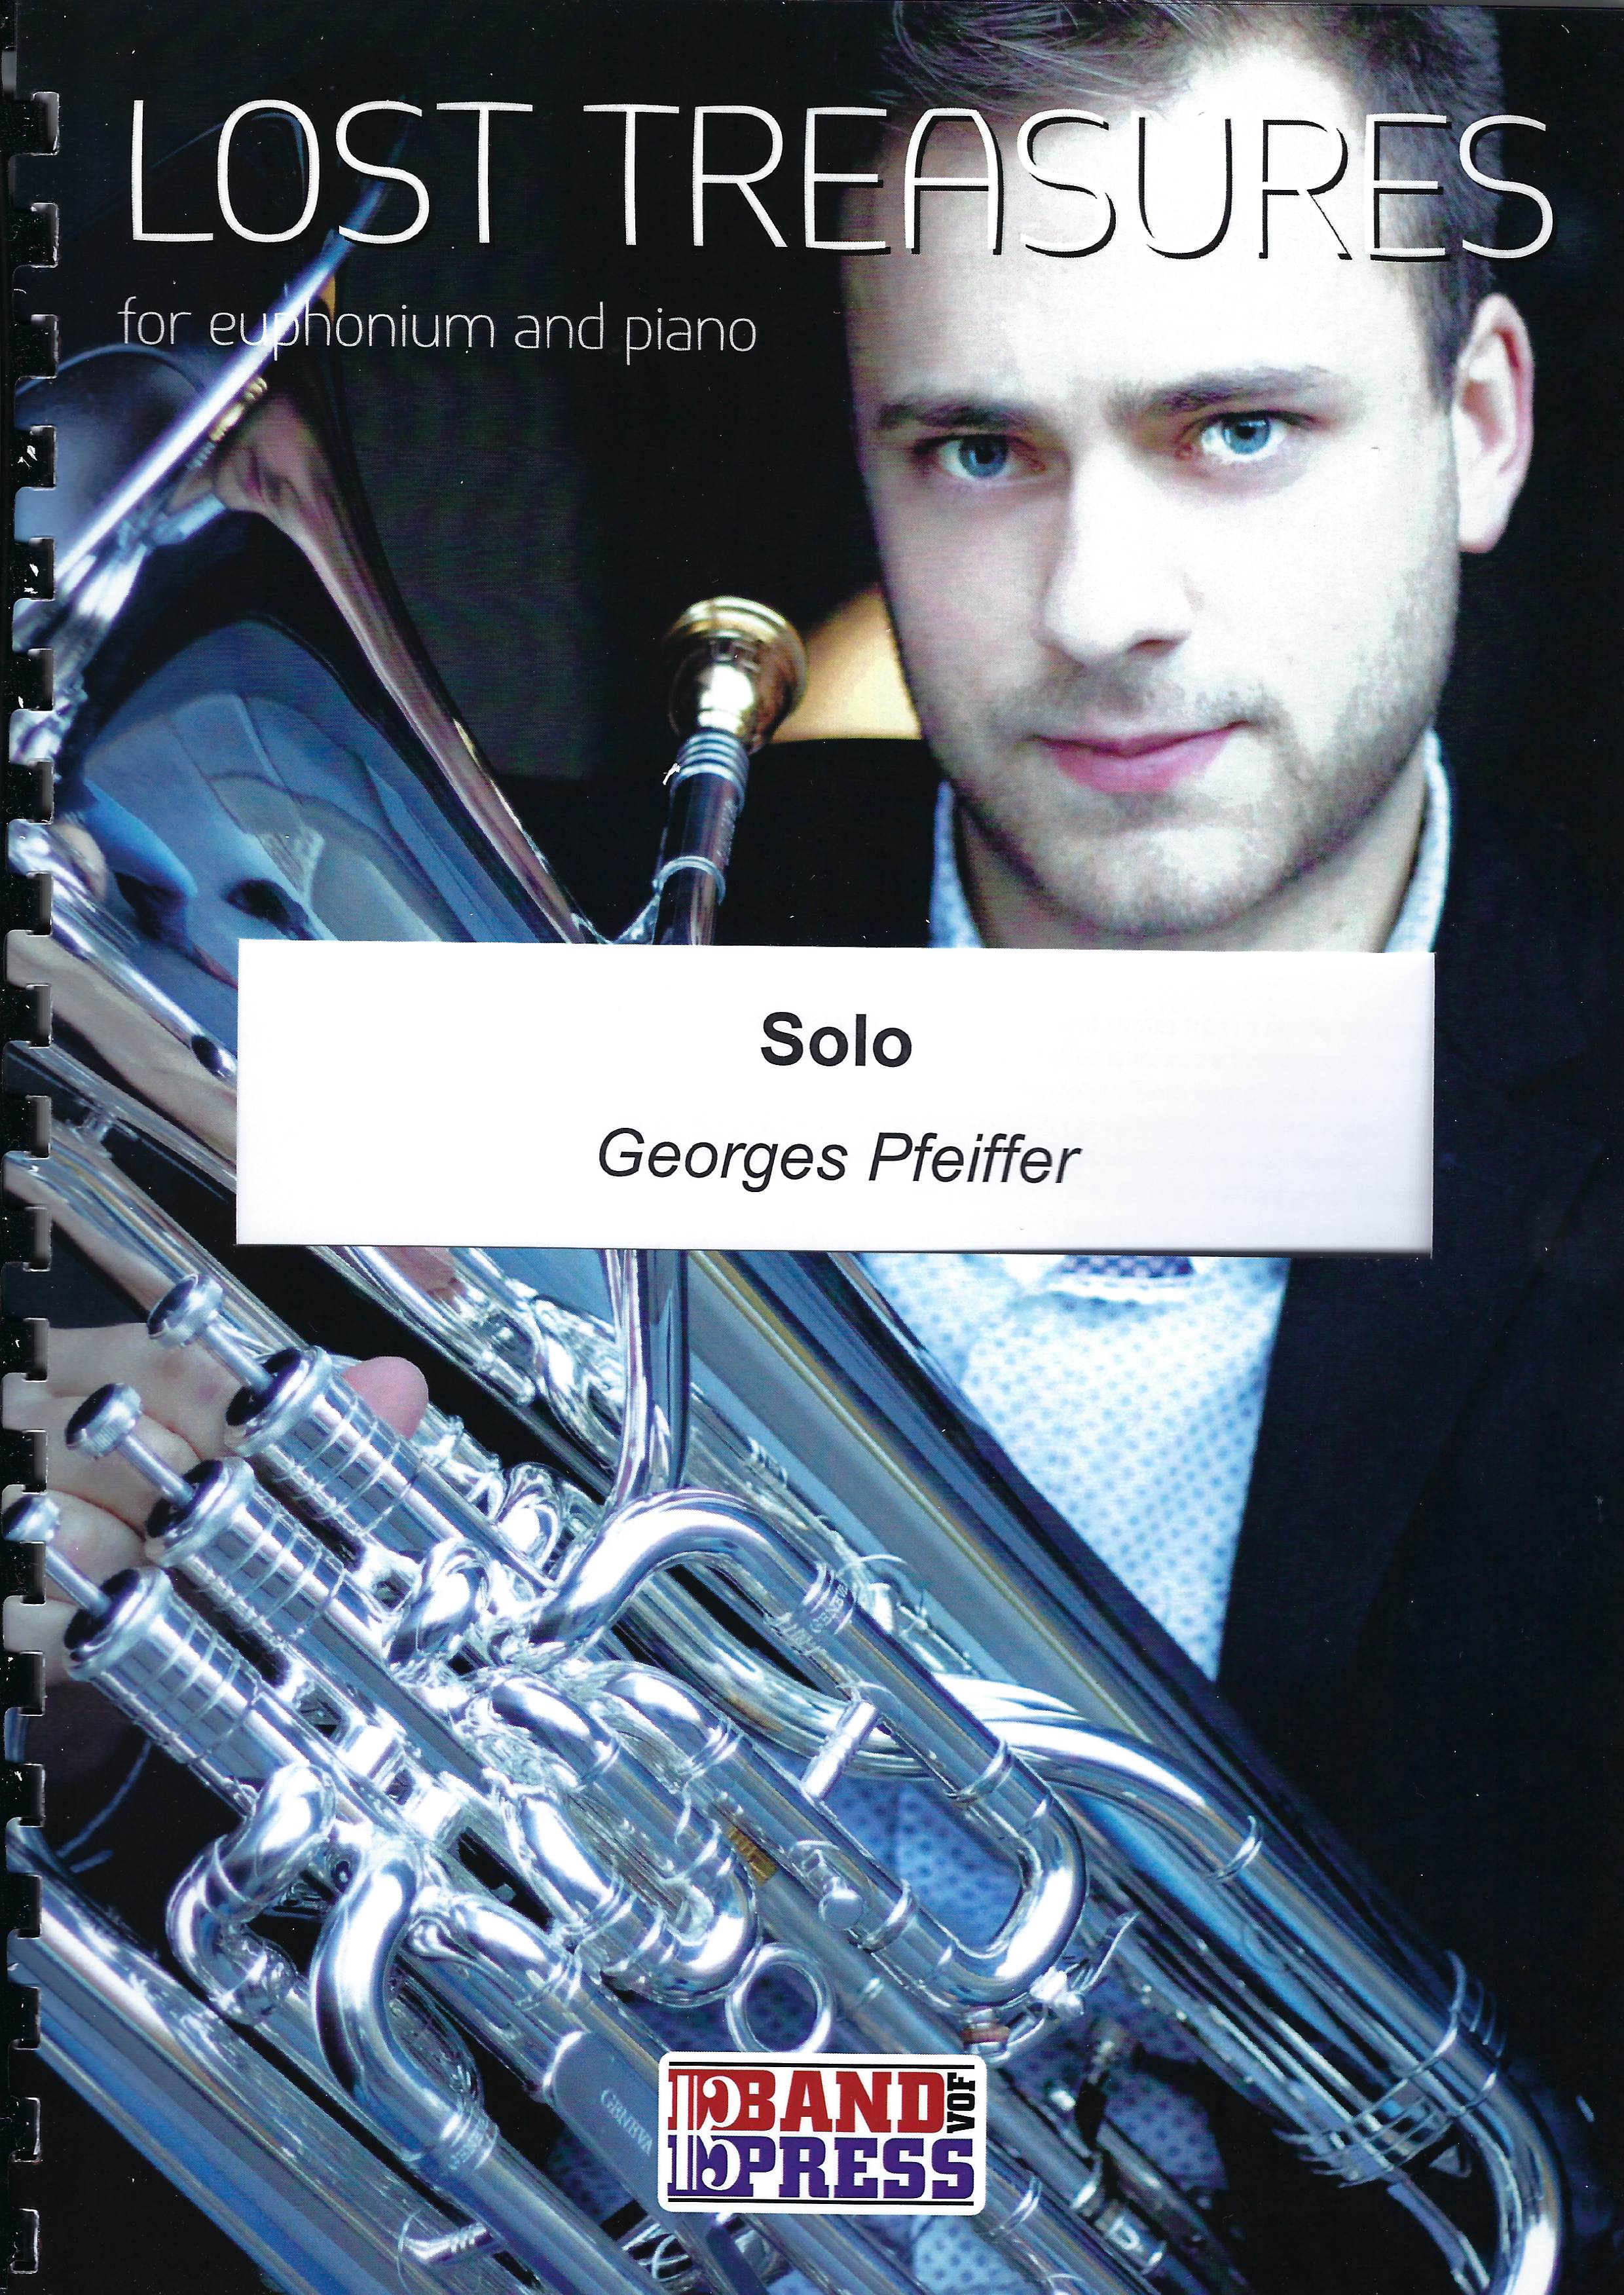 Solo - Georges Pfeiffer - Euph and Piano (Lost Treasures Series)